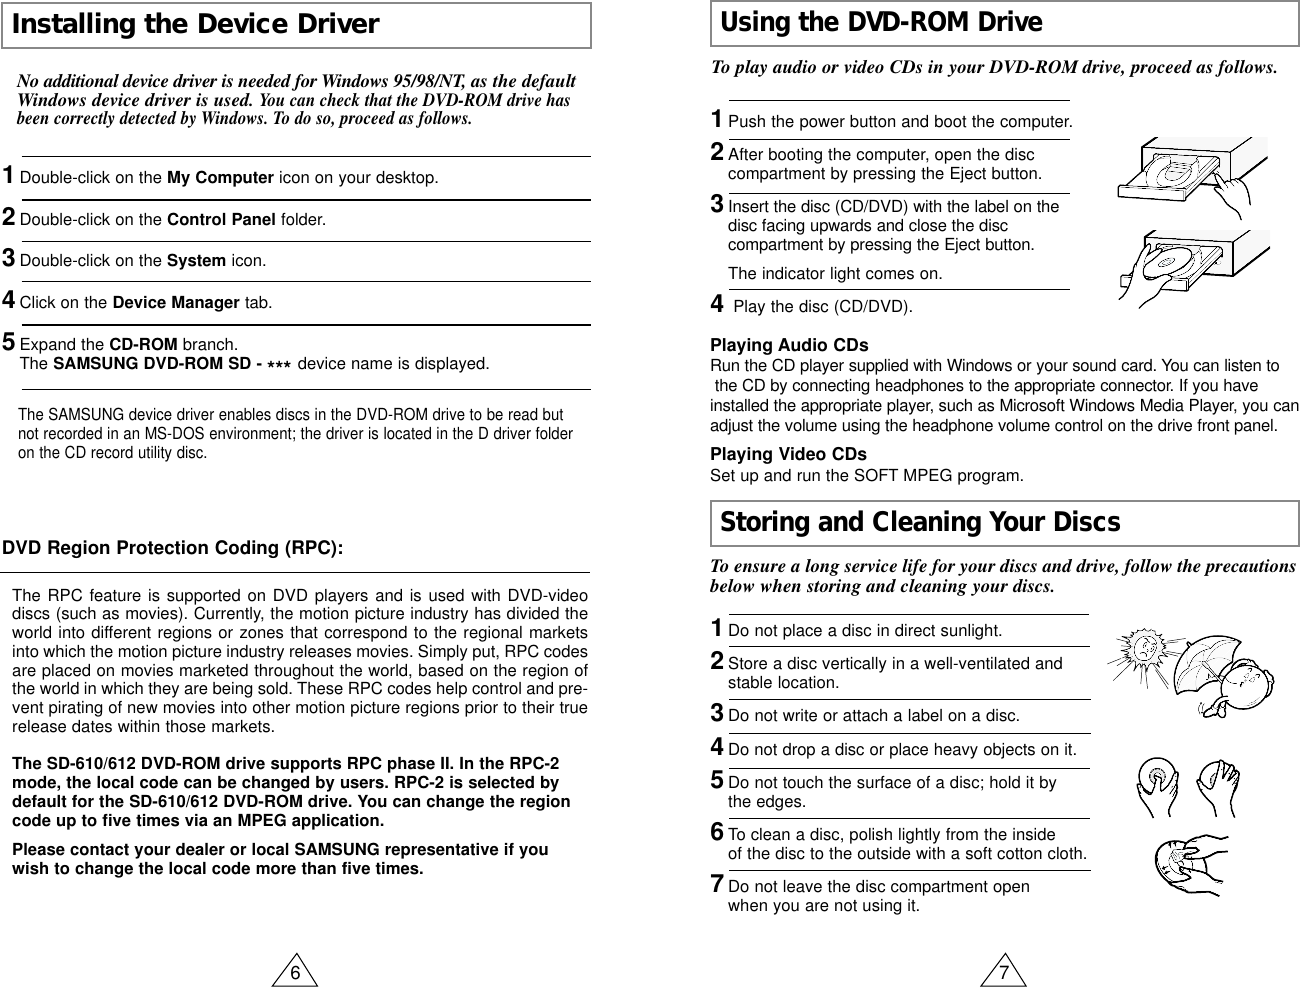 6 7Installing the Device DriverUsing the DVD-ROM DriveStoring and Cleaning Your DiscsNo additional device driver is needed for Windows 95/98/NT, as the defaultWindows device driver is used. You can check that the DVD-ROM drive hasbeen correctly detected by Windows. To do so, proceed as follows.1Double-click on the My Computer icon on your desktop.2Double-click on the Control Panel folder.3Double-click on the System icon.4Click on the Device Manager tab.5Expand the CD-ROM branch.The SAMSUNG DVD-ROM SD - *** device name is displayed.The SAMSUNG device driver enables discs in the DVD-ROM drive to be read butnot recorded in an MS-DOS environment; the driver is located in the D driver folderon the CD record utility disc.DVD Region Protection Coding (RPC):The RPC feature is supported on DVD players and is used with DVD-videodiscs (such as movies). Currently, the motion picture industry has divided theworld into different regions or zones that correspond to the regional marketsinto which the motion picture industry releases movies. Simply put, RPC codesare placed on movies marketed throughout the world, based on the region ofthe world in which they are being sold. These RPC codes help control and pre-vent pirating of new movies into other motion picture regions prior to their truerelease dates within those markets.The SD-610/612 DVD-ROM drive supports RPC phase II. In the RPC-2mode, the local code can be changed by users. RPC-2 is selected bydefault for the SD-610/612 DVD-ROM drive. You can change the regioncode up to five times via an MPEG application.Please contact your dealer or local SAMSUNG representative if youwish to change the local code more than five times.To play audio or video CDs in your DVD-ROM drive, proceed as follows.1Push the power button and boot the computer.2After booting the computer, open the disc compartment by pressing the Eject button.3Insert the disc (CD/DVD) with the label on the disc facing upwards and close the disc compartment by pressing the Eject button.The indicator light comes on.4Play the disc (CD/DVD).1Do not place a disc in direct sunlight.2Store a disc vertically in a well-ventilated and stable location.3Do not write or attach a label on a disc.4Do not drop a disc or place heavy objects on it.5Do not touch the surface of a disc; hold it by the edges.6To clean a disc, polish lightly from the inside of the disc to the outside with a soft cotton cloth.7Do not leave the disc compartment open when you are not using it.Playing Audio CDsRun the CD player supplied with Windows or your sound card. You can listen tothe CD by connecting headphones to the appropriate connector. If you haveinstalled the appropriate player, such as Microsoft Windows Media Player, you canadjust the volume using the headphone volume control on the drive front panel.Playing Video CDsSet up and run the SOFT MPEG program.To ensure a long service life for your discs and drive, follow the precautionsbelow when storing and cleaning your discs.